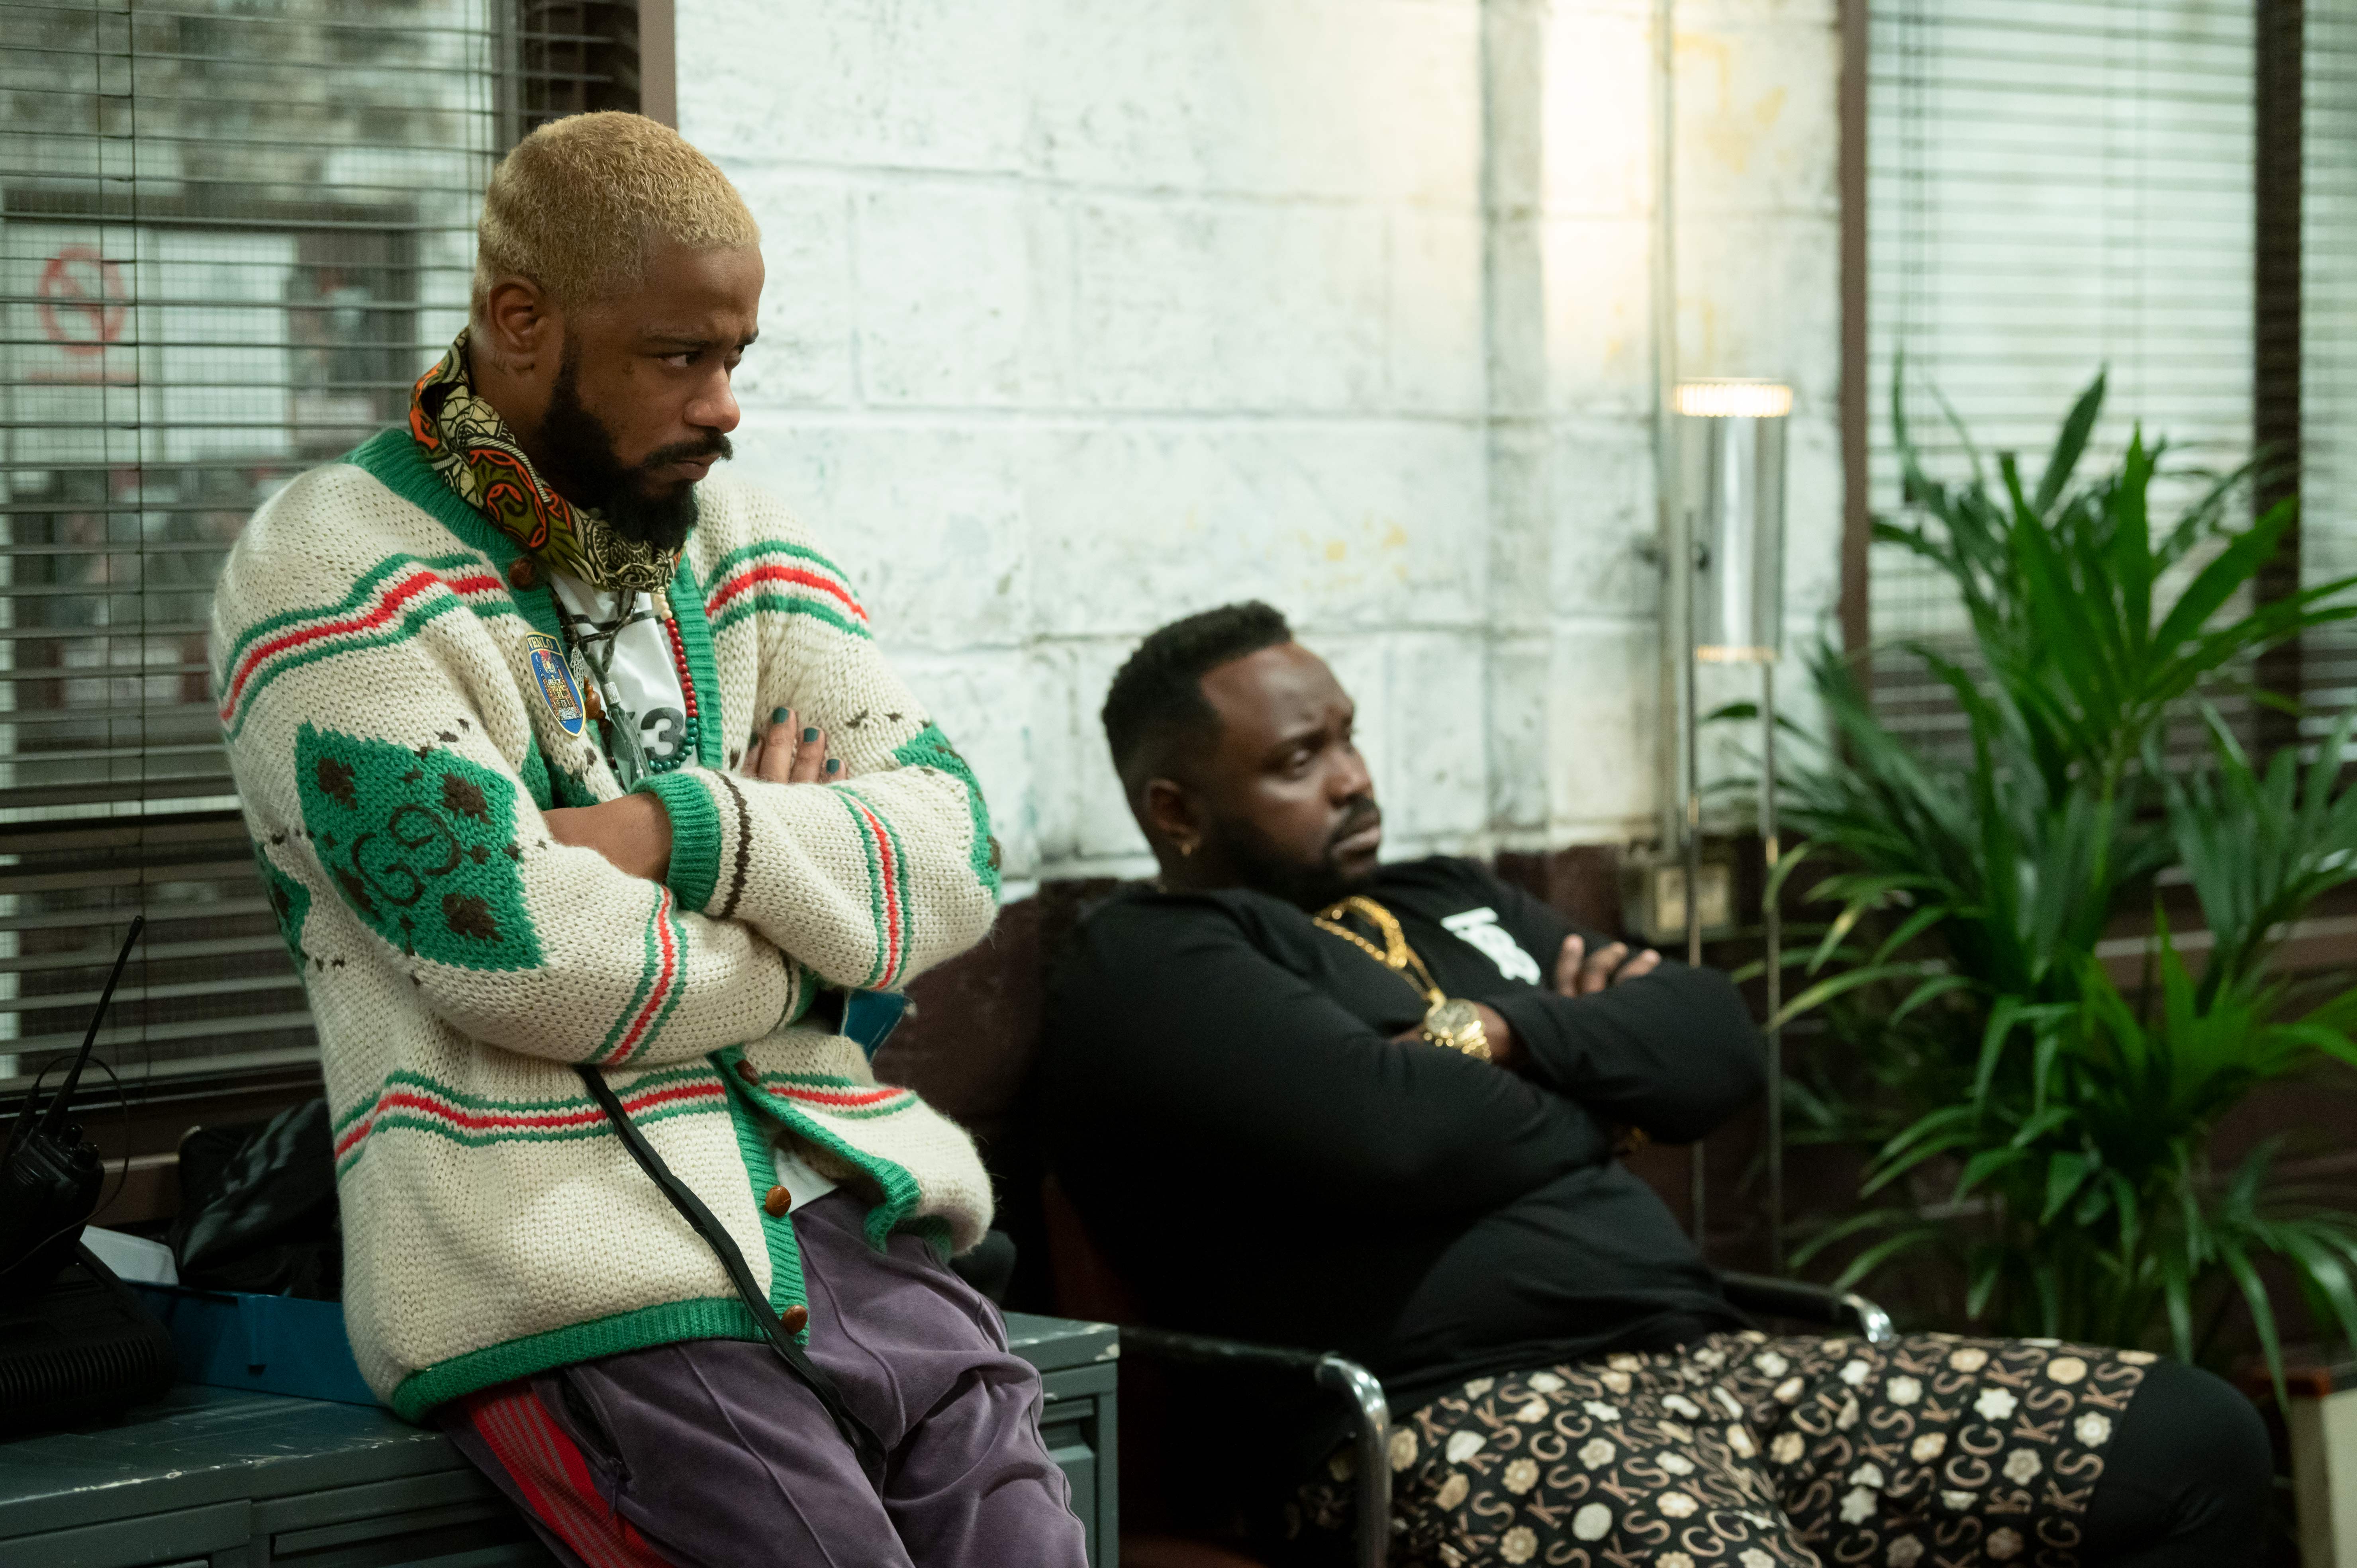 LaKeith Stanfield and Brian Tryee Henry in Donald Glover's FX surreal comedy-drama series, Atlanta, Season 3 Episode 5